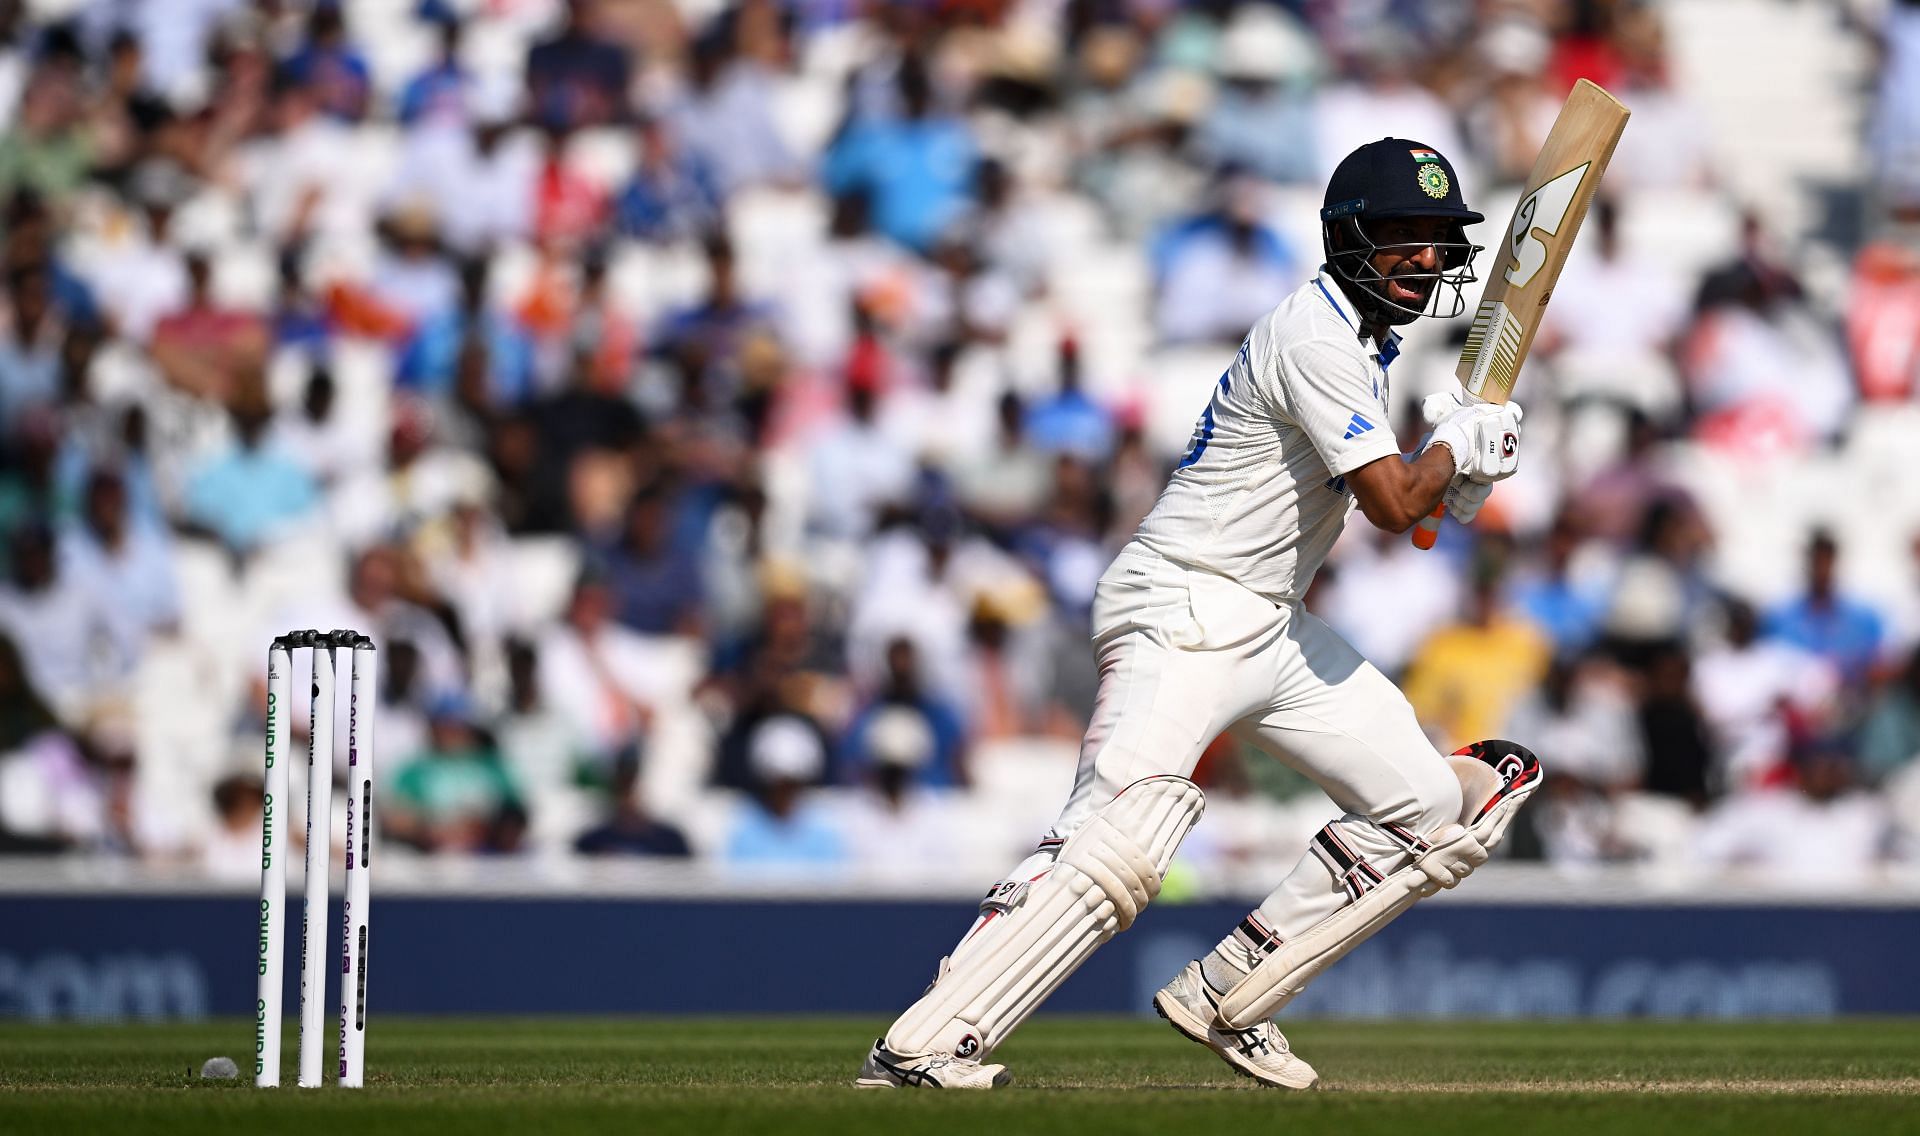 Cheteshwar Pujara last played for India in the World Test Championship final. [P/C: Getty]